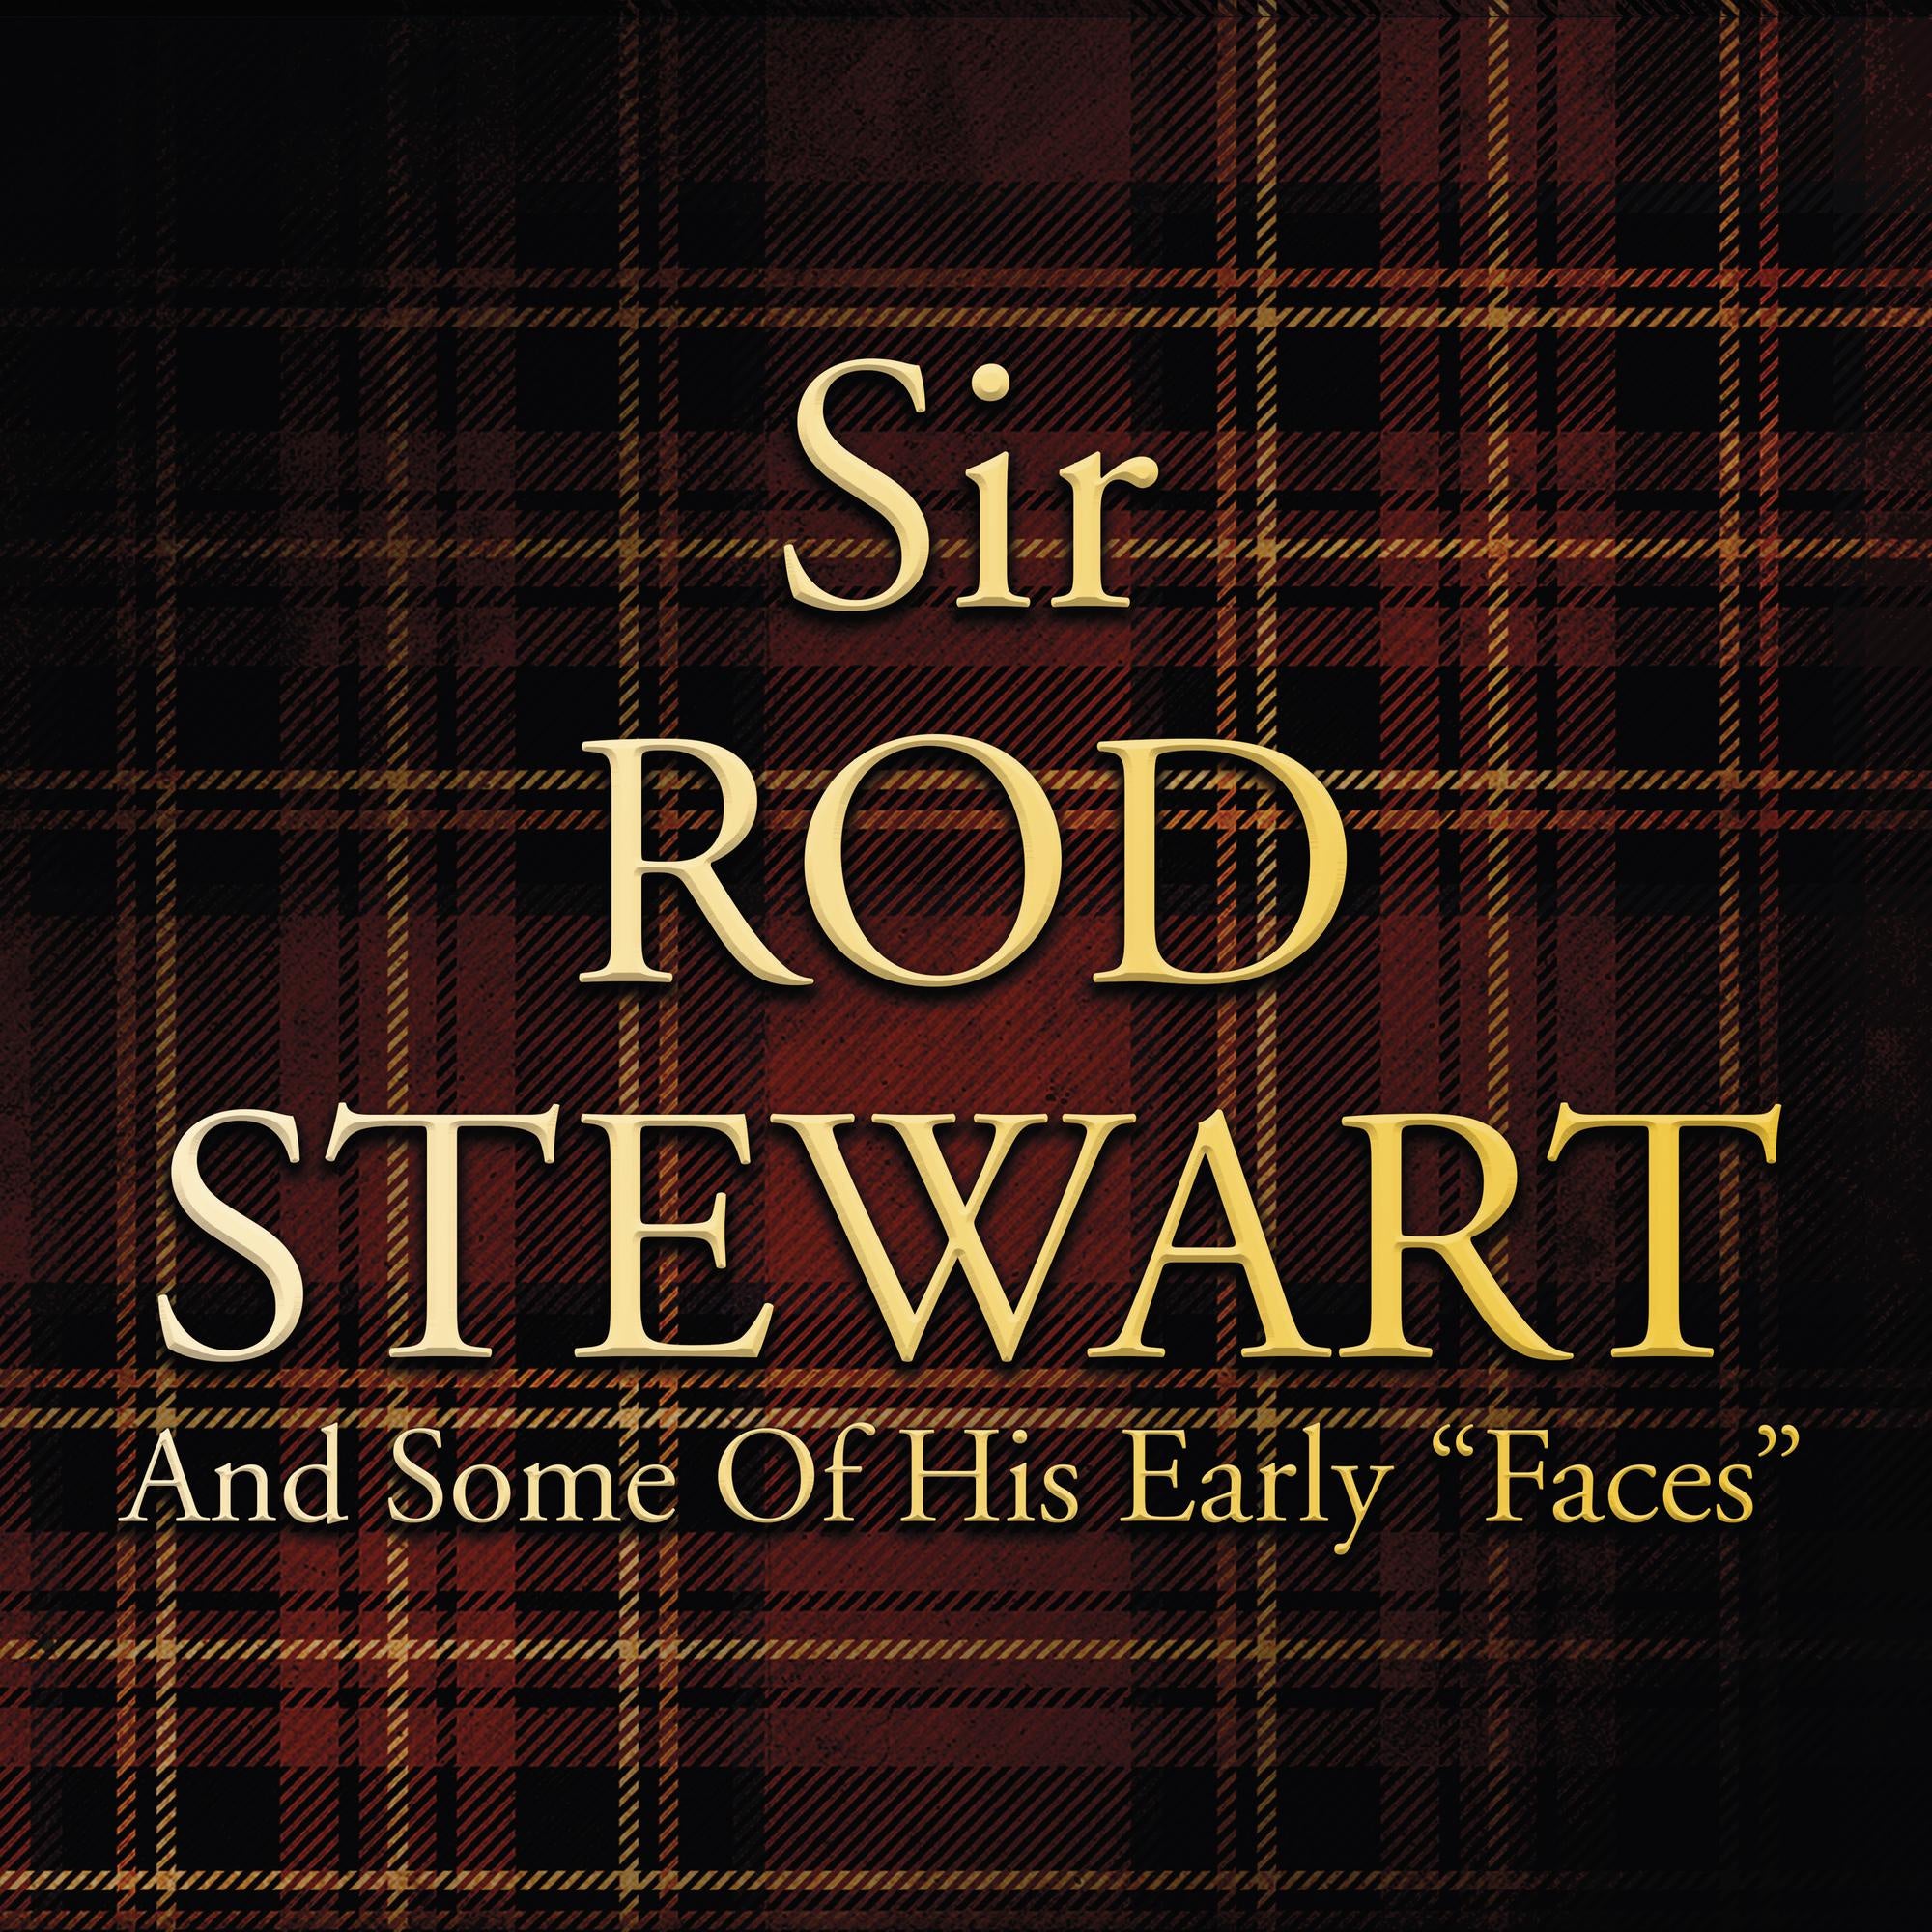 Sir Rod Stewart - And Some Of His Early Faces - New LP Record 2019 Let Them Eat Vinyl Europe Vinyl - Pop / Rock